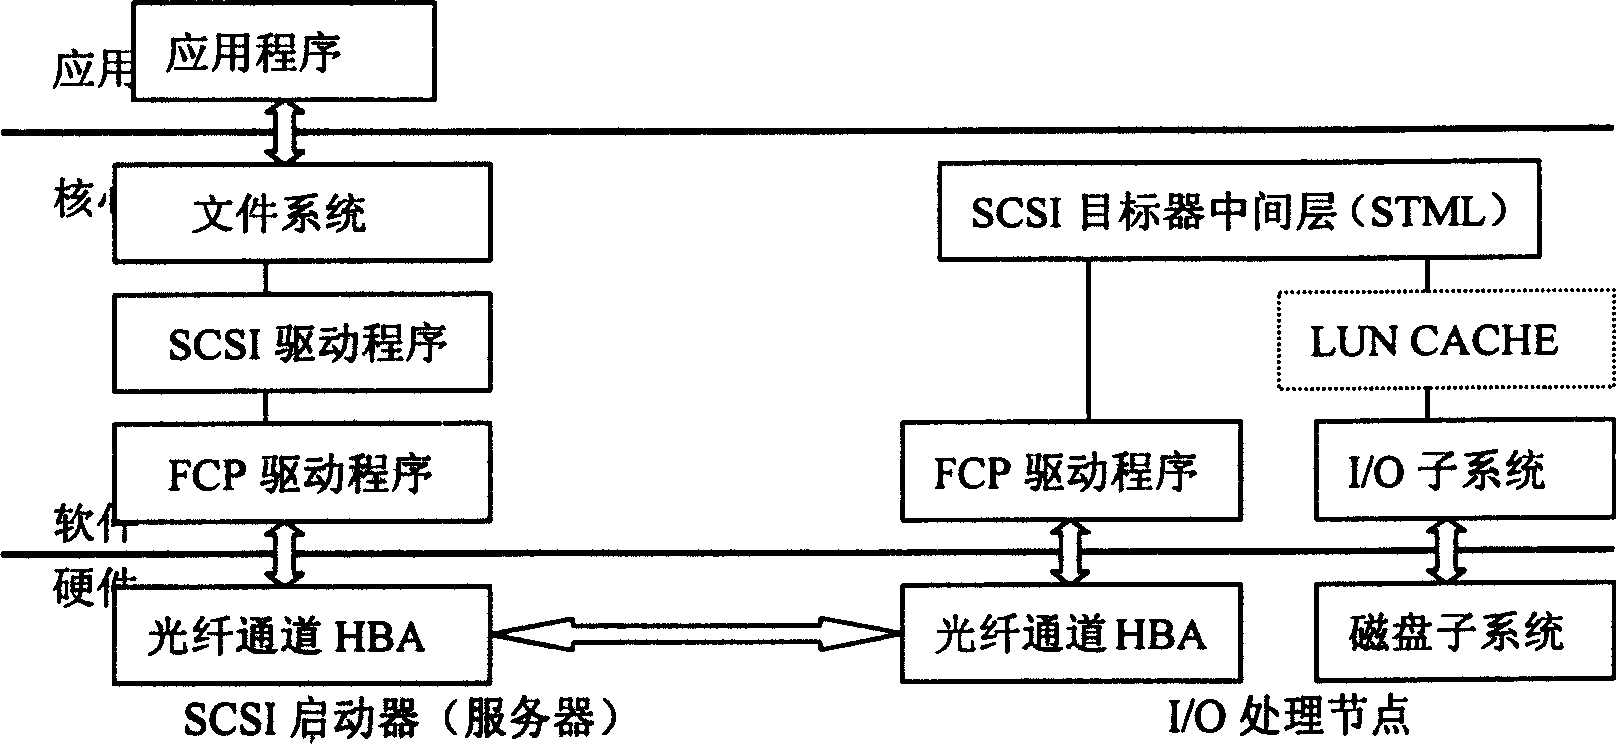 LUN CACHE method for FC-SAN memory system